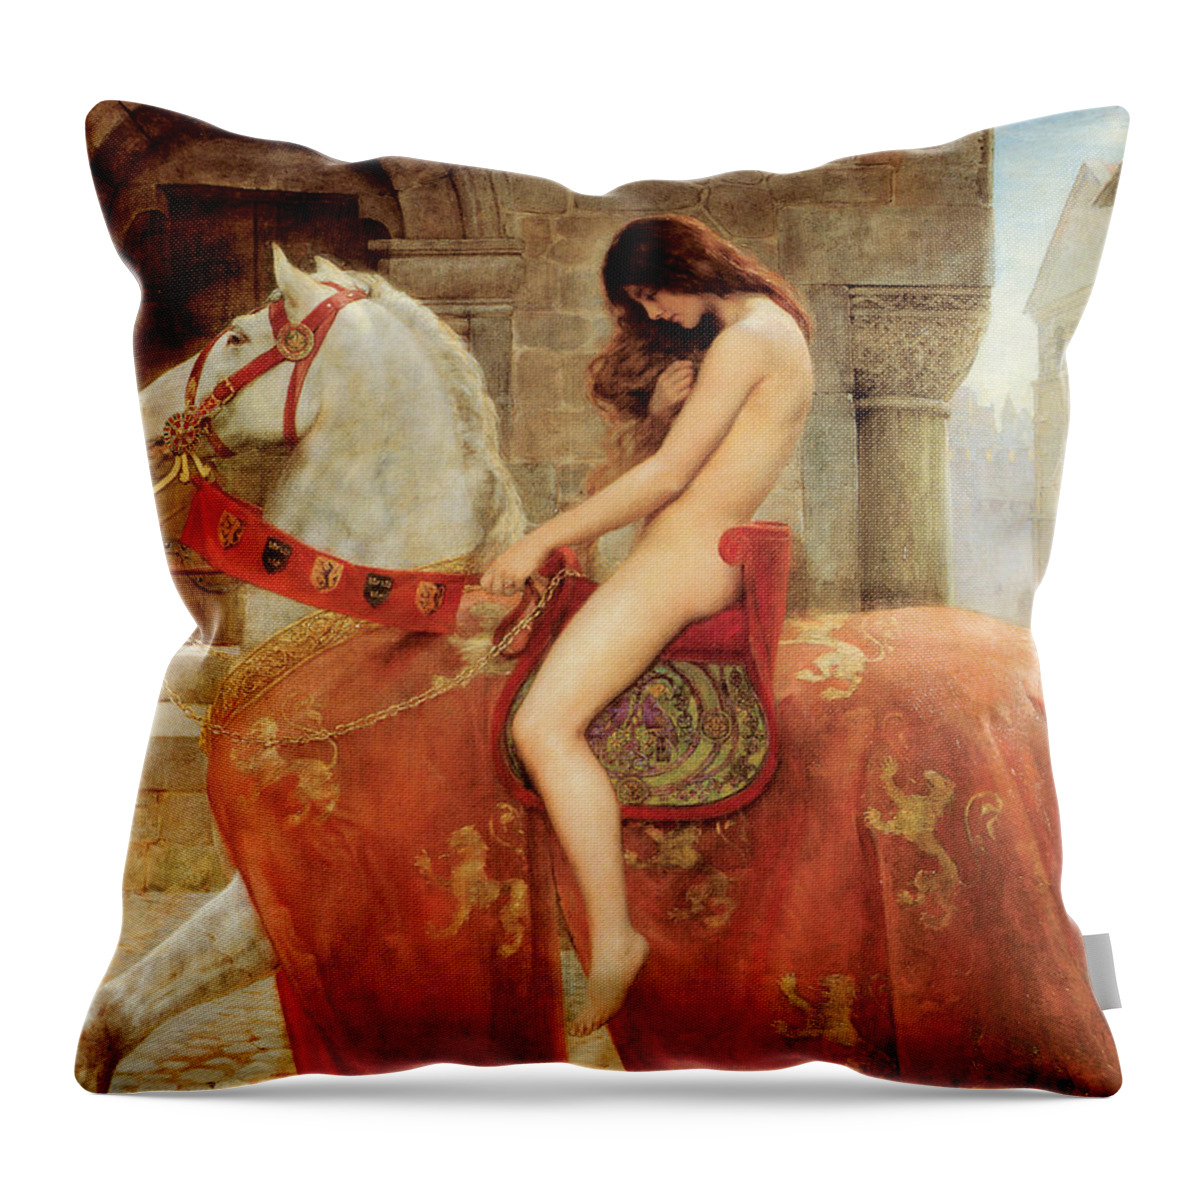 Lady Godiva Throw Pillow featuring the painting Lady Godiva by John Collier